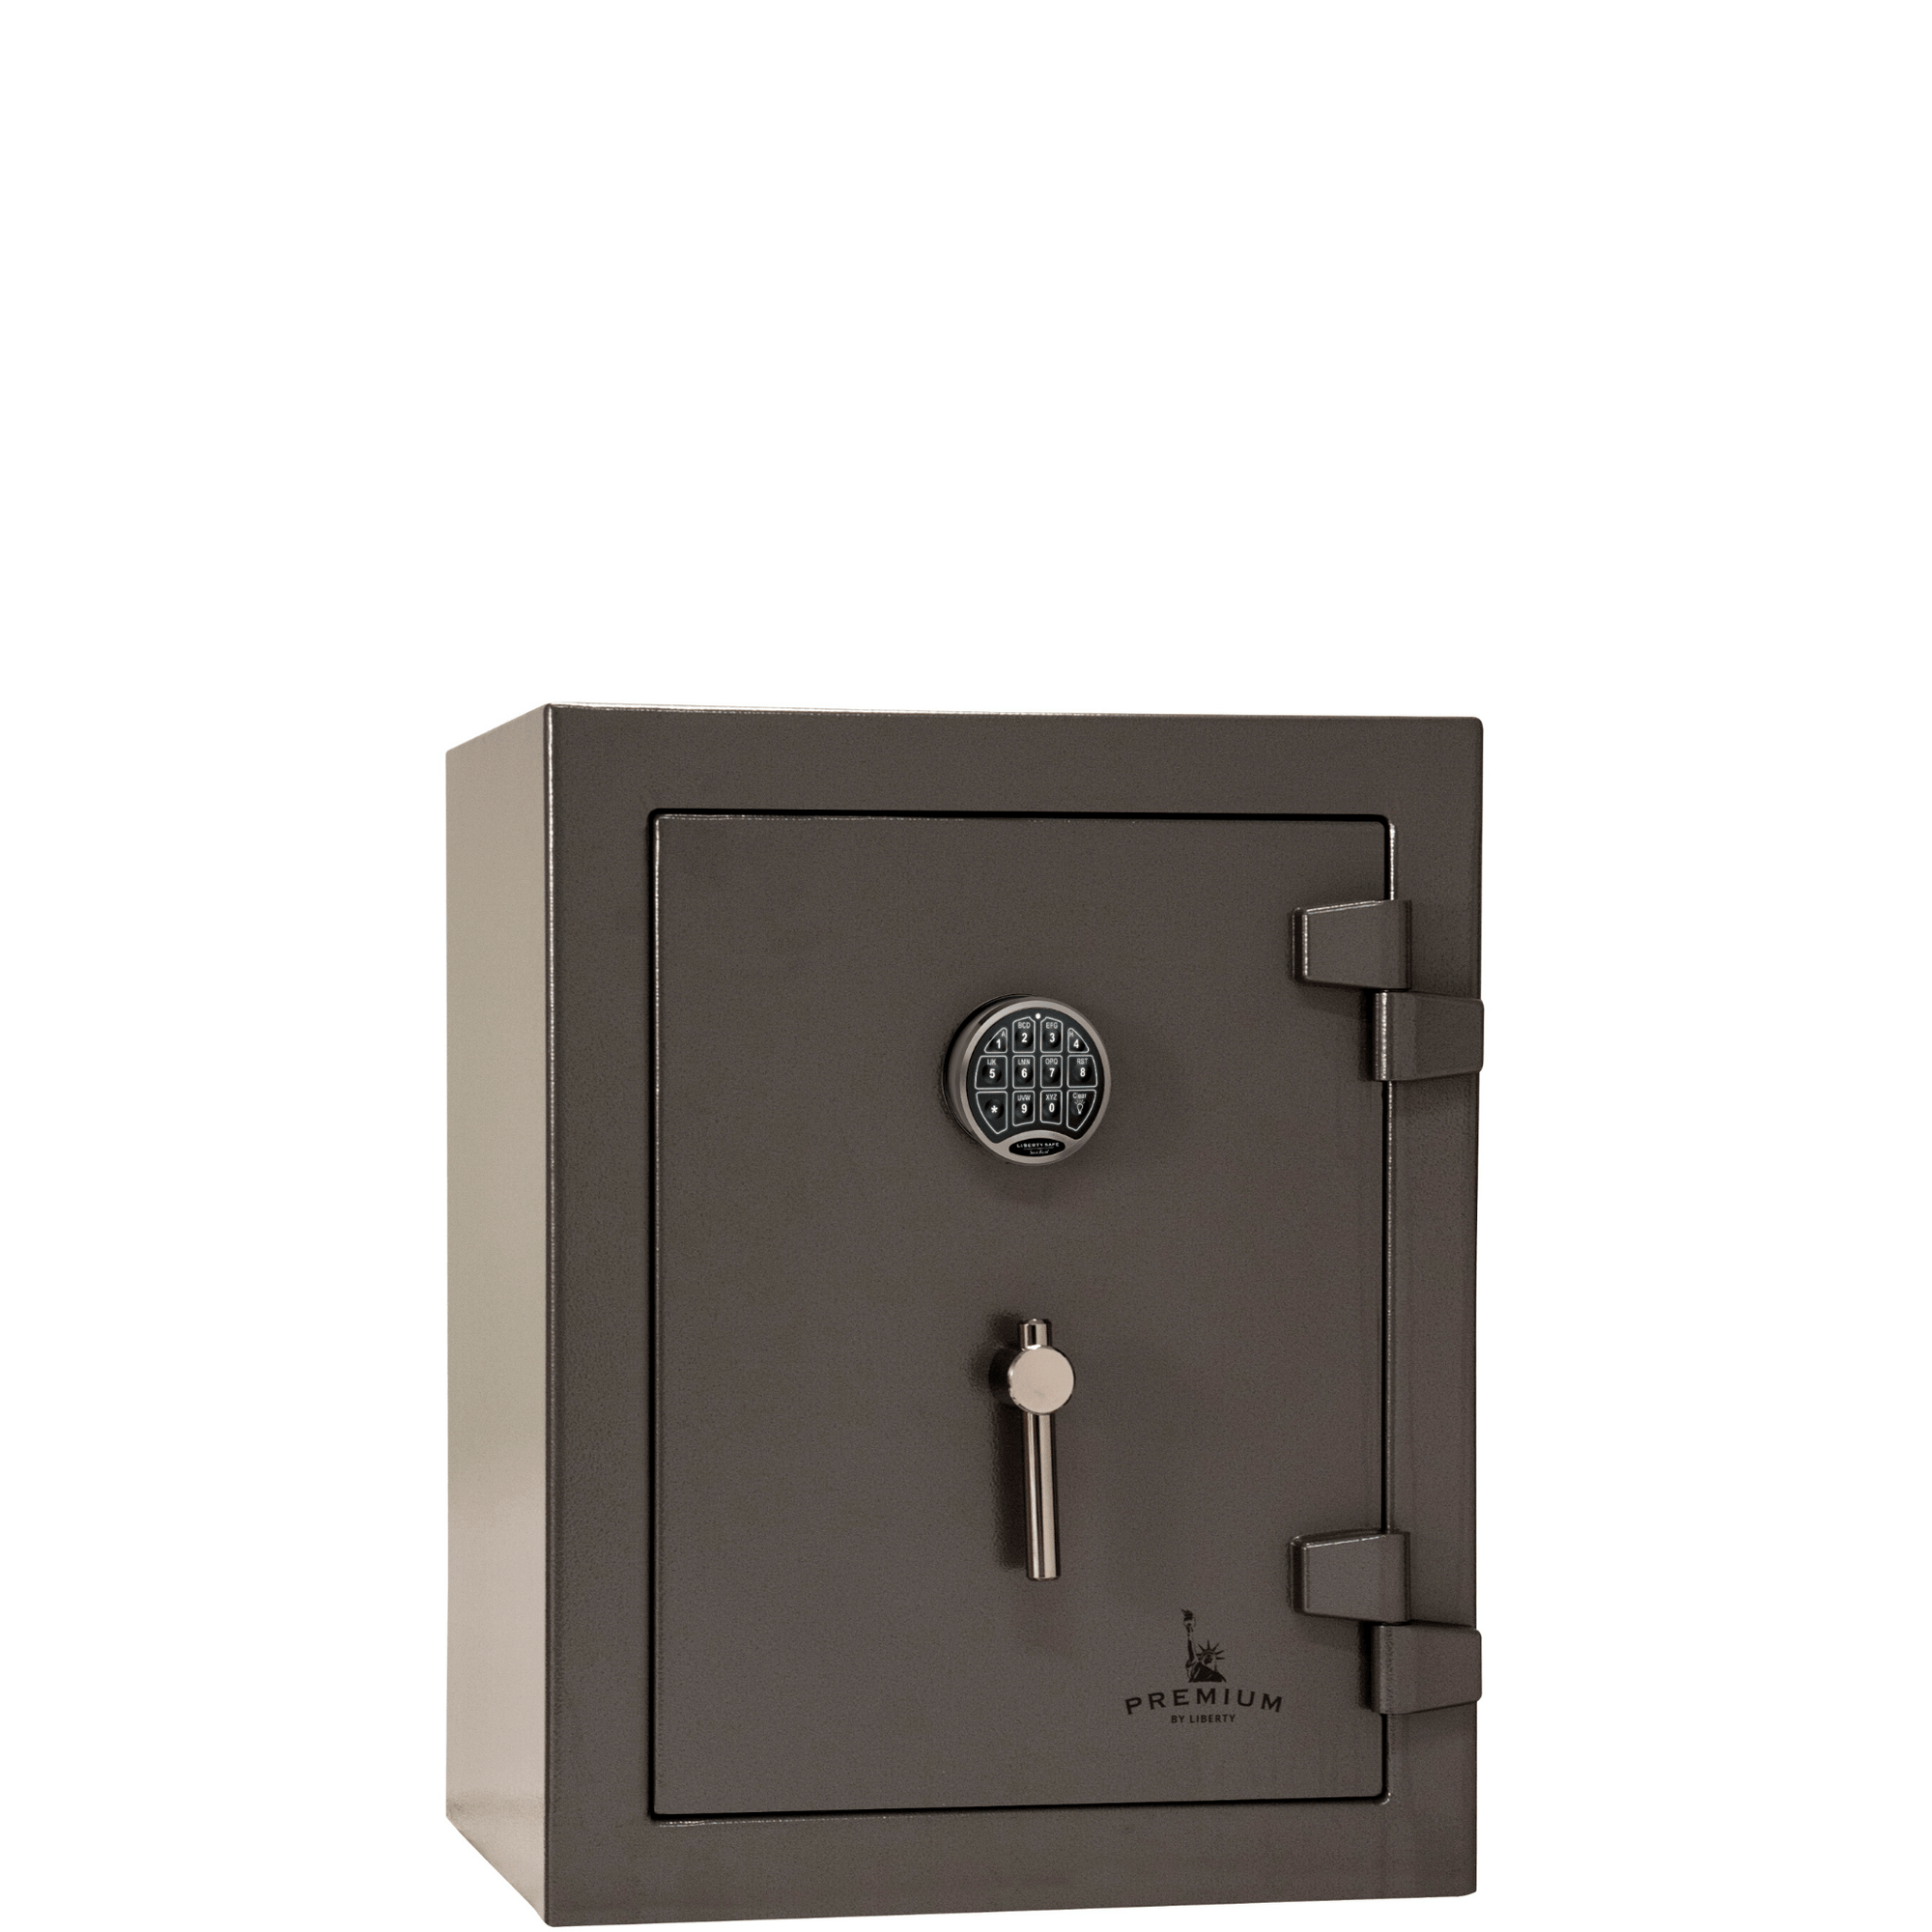 Premium Home | 08 | 90 Minute Fire Protection | Gray | Electronic Lock | Dimensions: 30"(H) x 24"(W) x 22.5"(D)